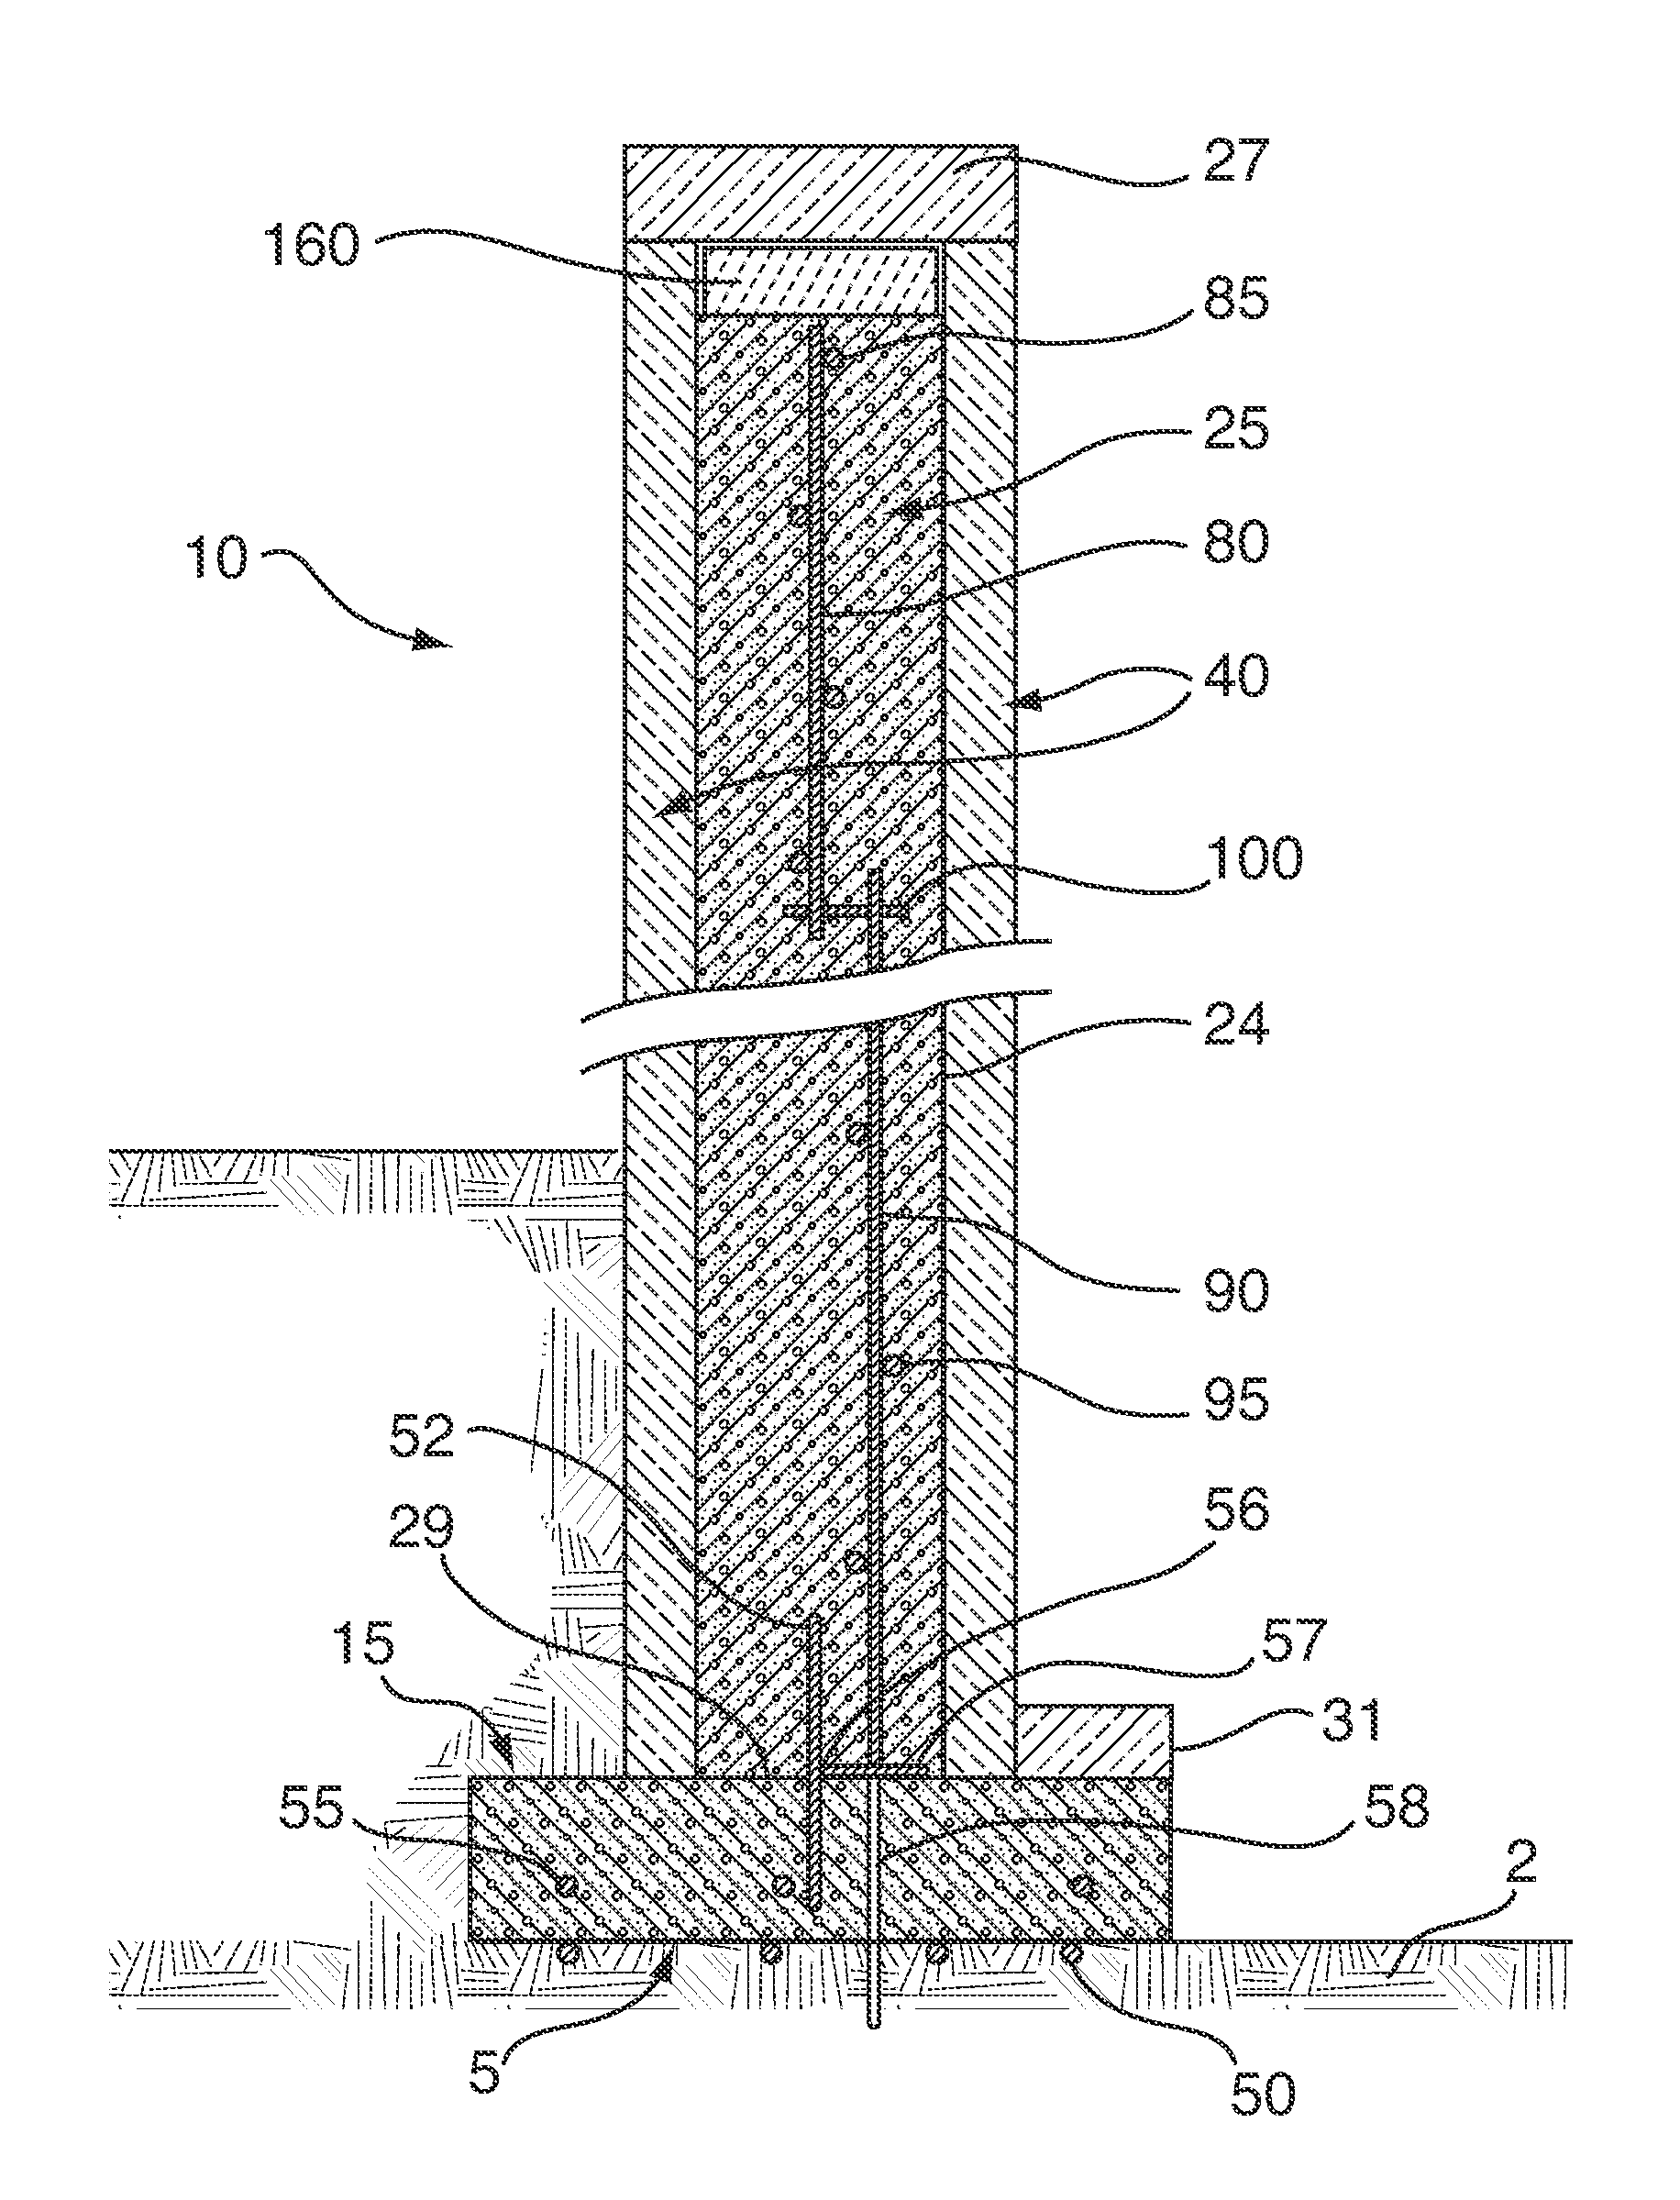 Thermal storage system for use in connection with a thermal conductive wall structure